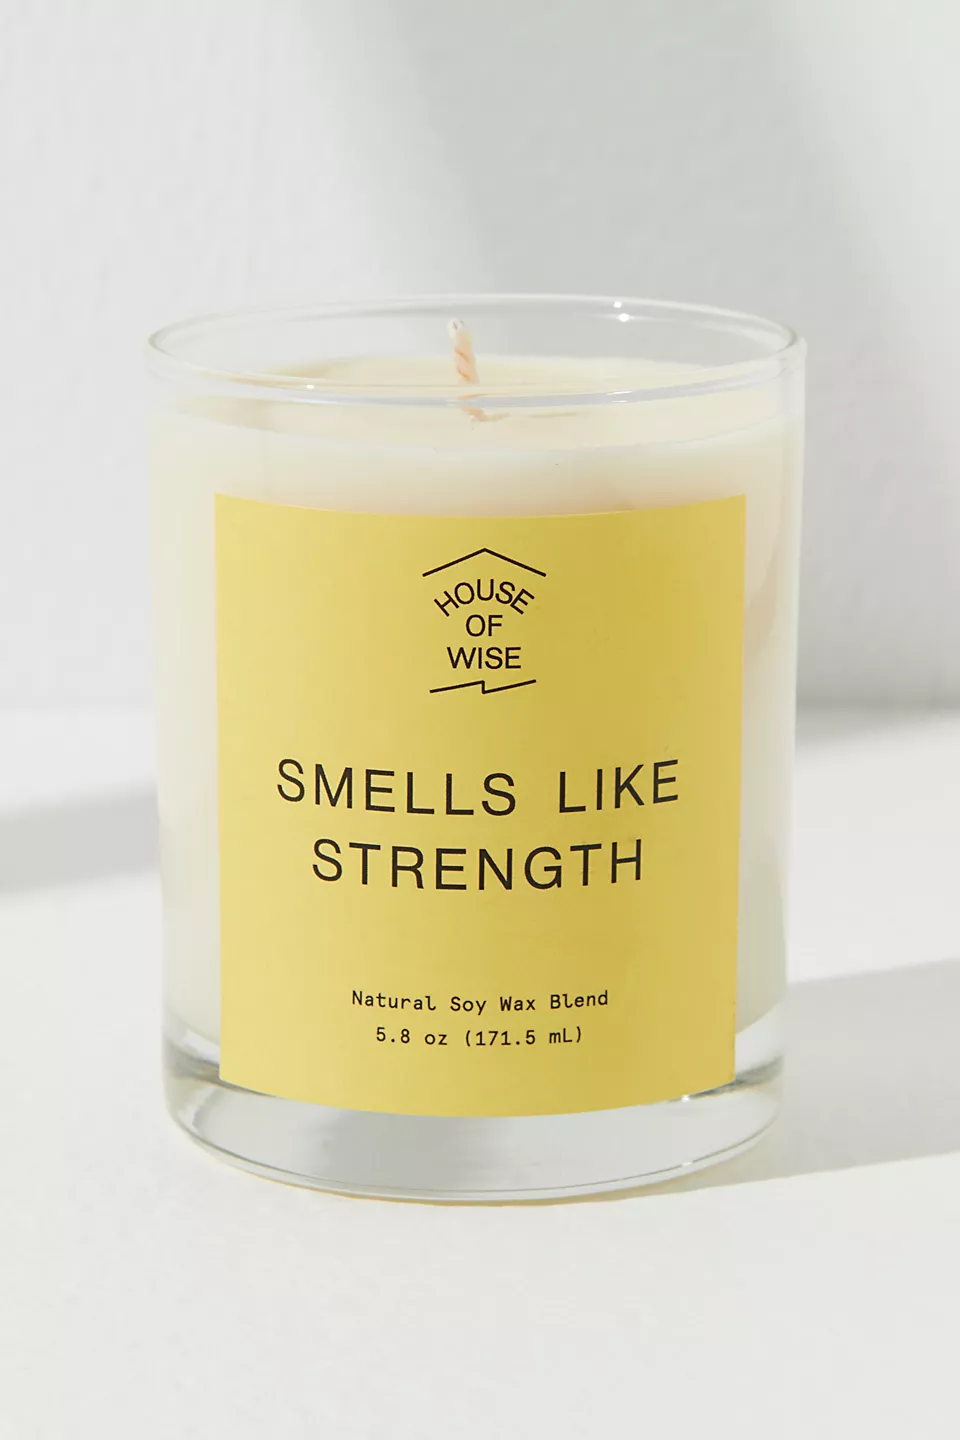 freepeople.com | House of Wise Smells Like Strength Candle